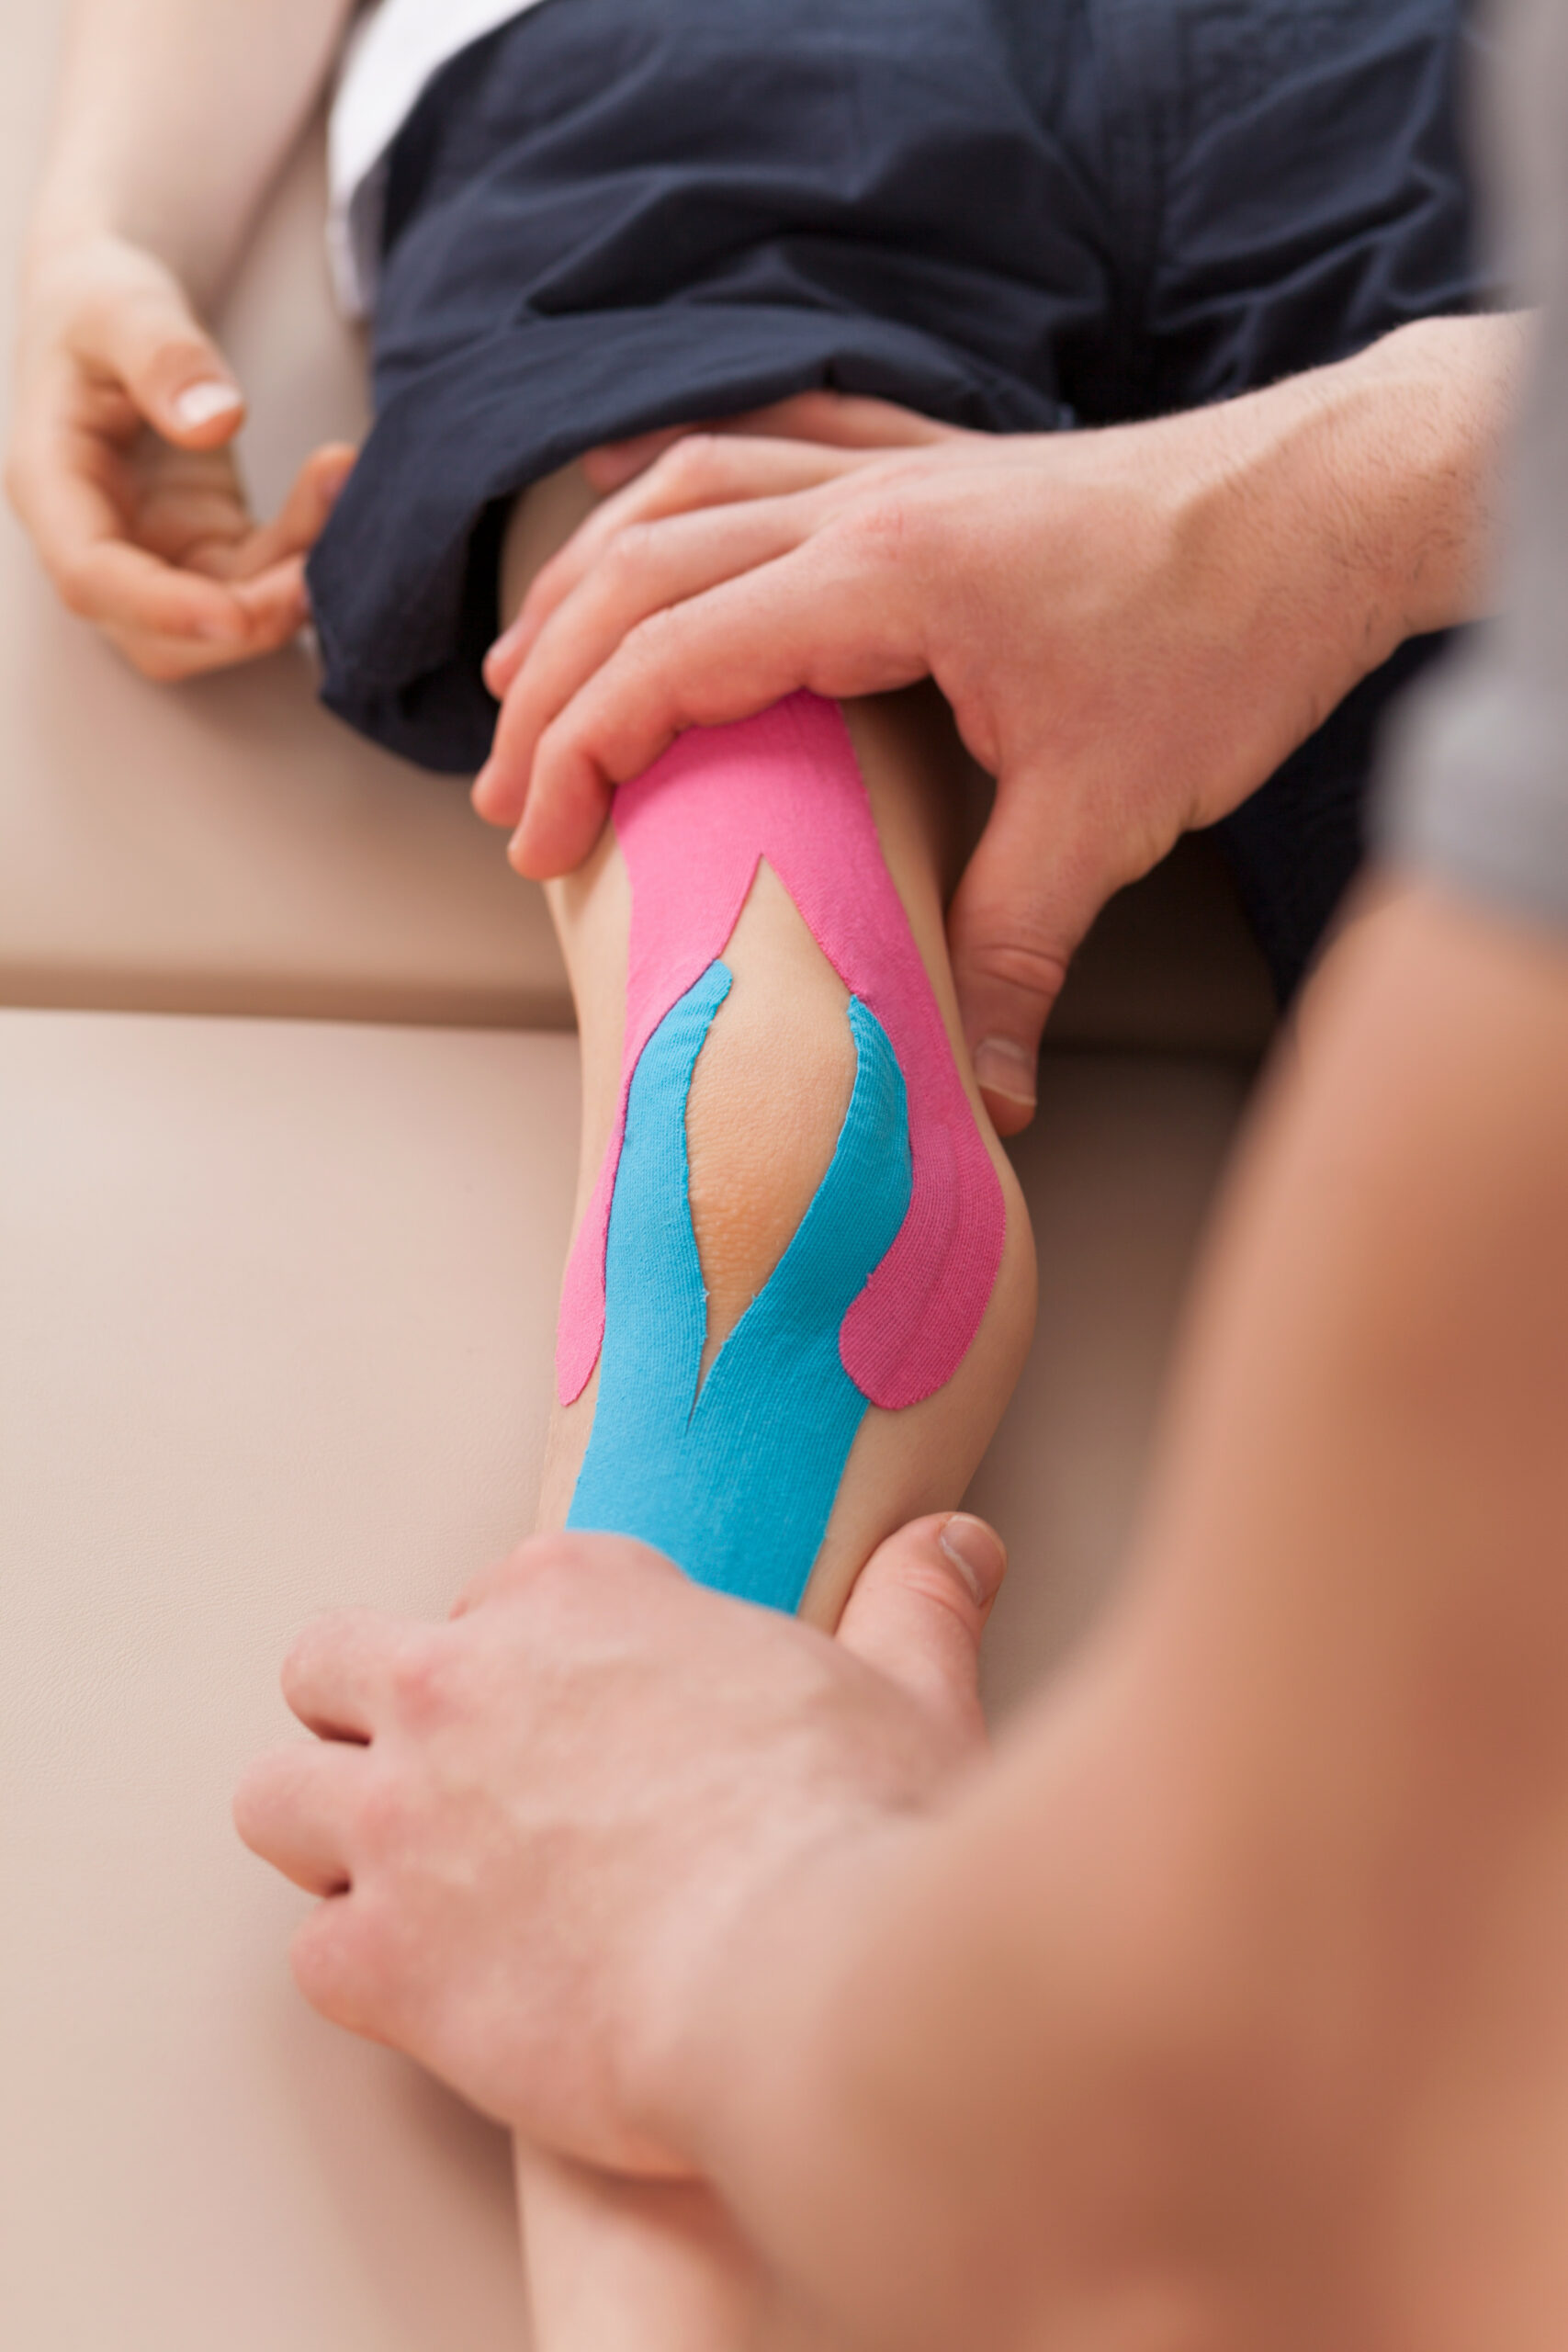 Child with knee valgus having applied kinesio tapes